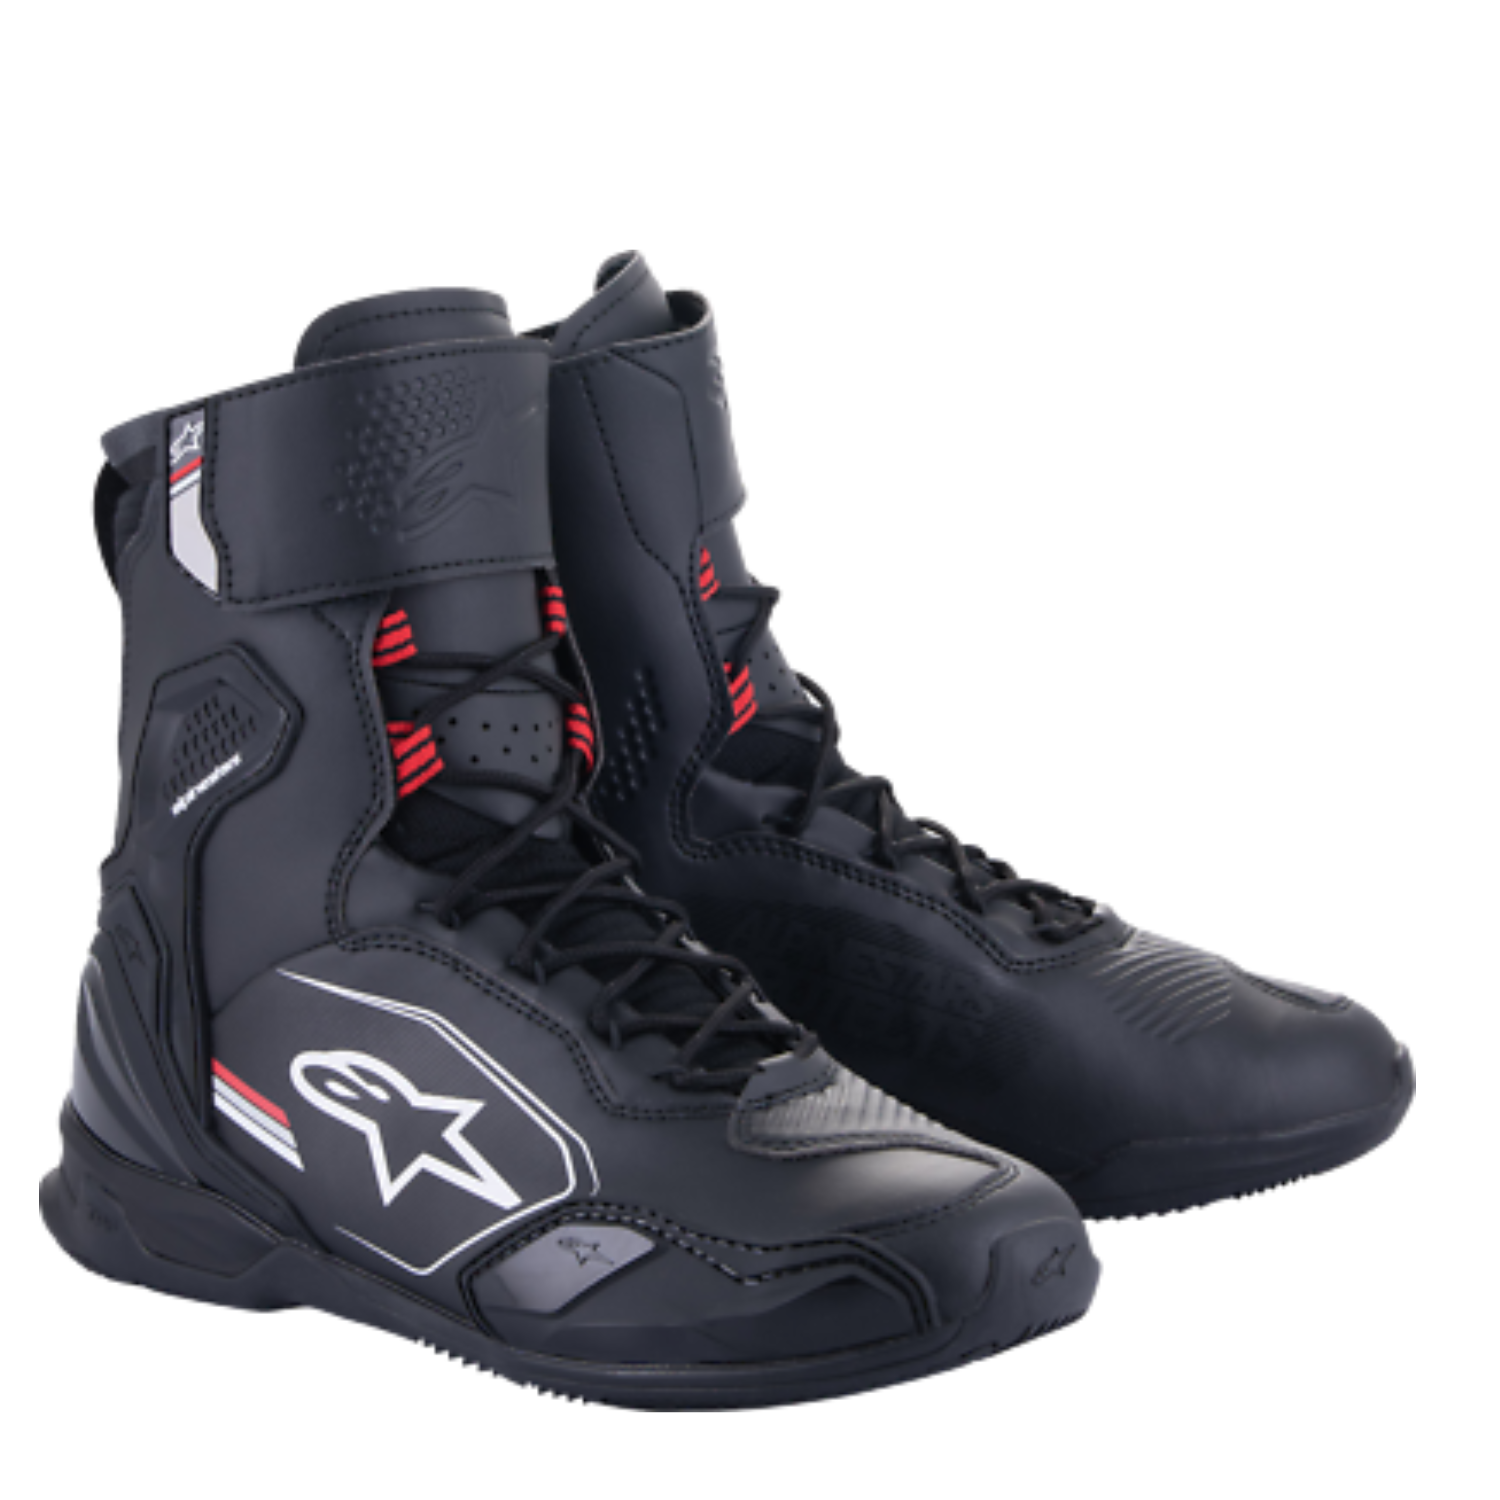 Image of EU Alpinestars Superfaster Shoes Black Gray Bright Red Taille US 12